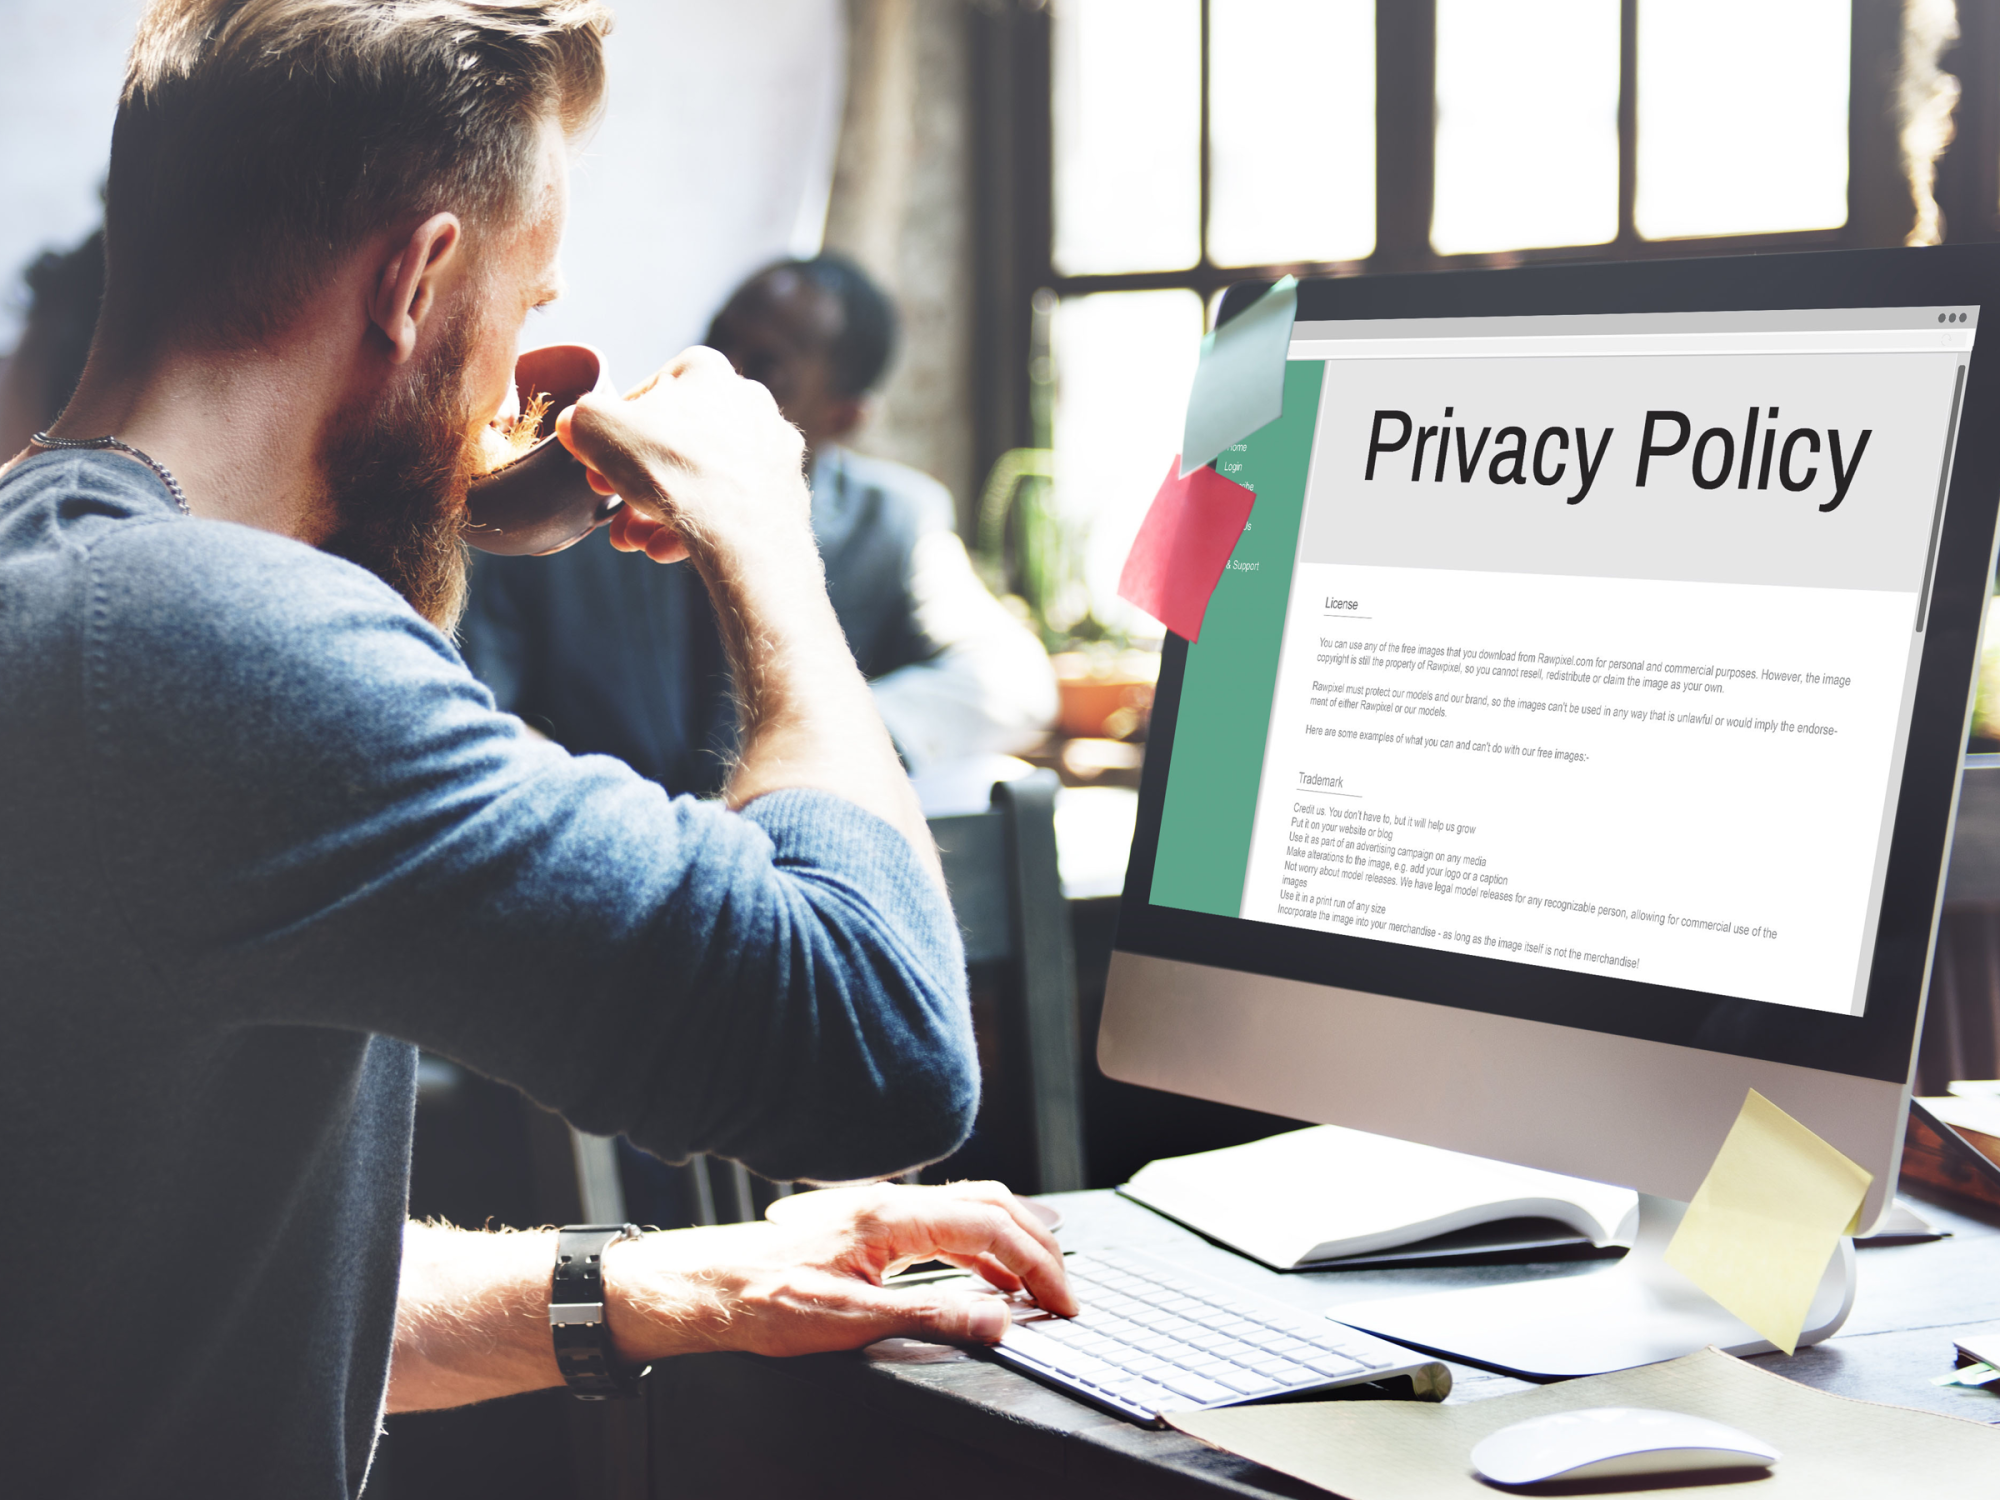 Most websites do not publish privacy policies, researchers say